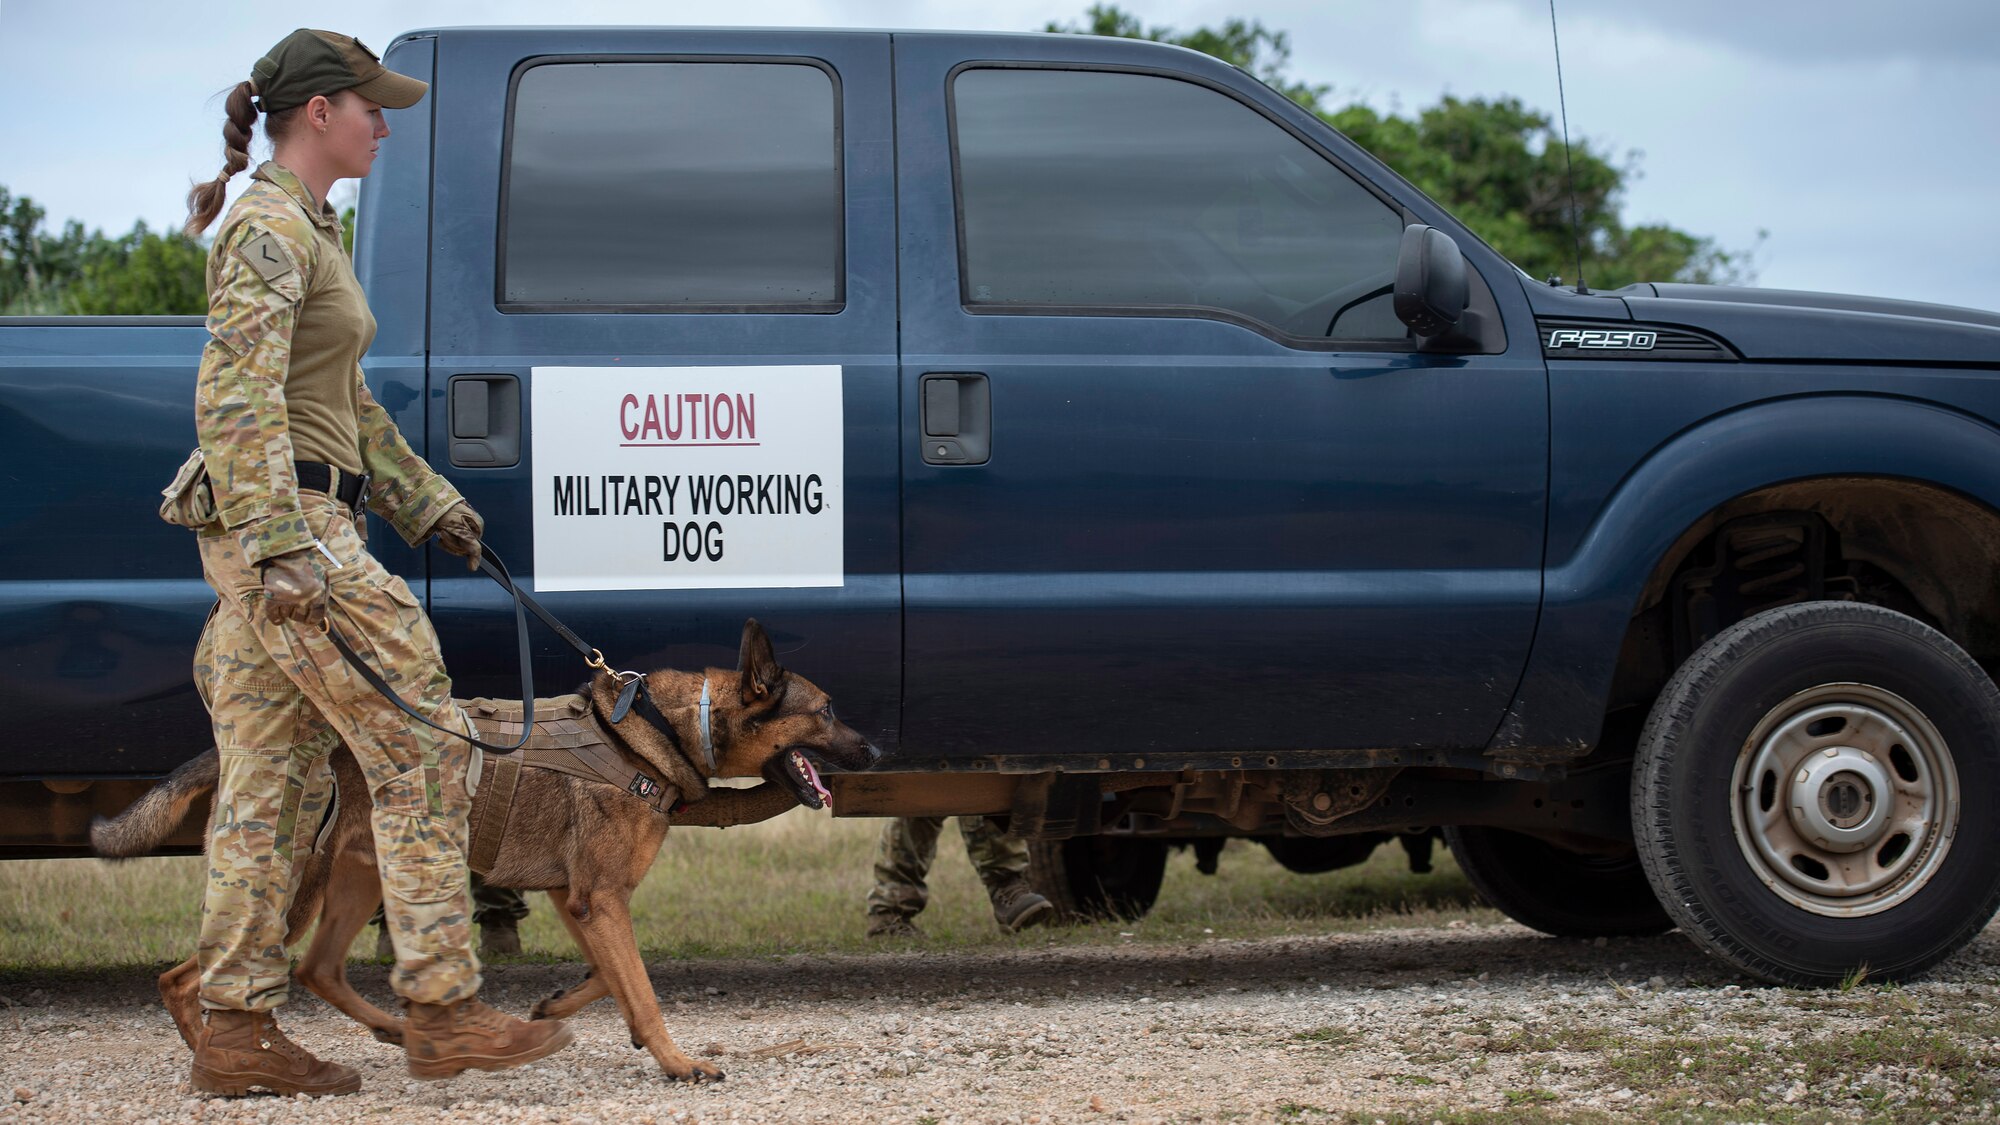 LACW Christina Smith, 2 Security Forces Squadron Tindal, Australia, military working dog handler, walks her dog during Pacific Defender 21-1 at Andersen Air Force Base, Guam, January 27 2021.